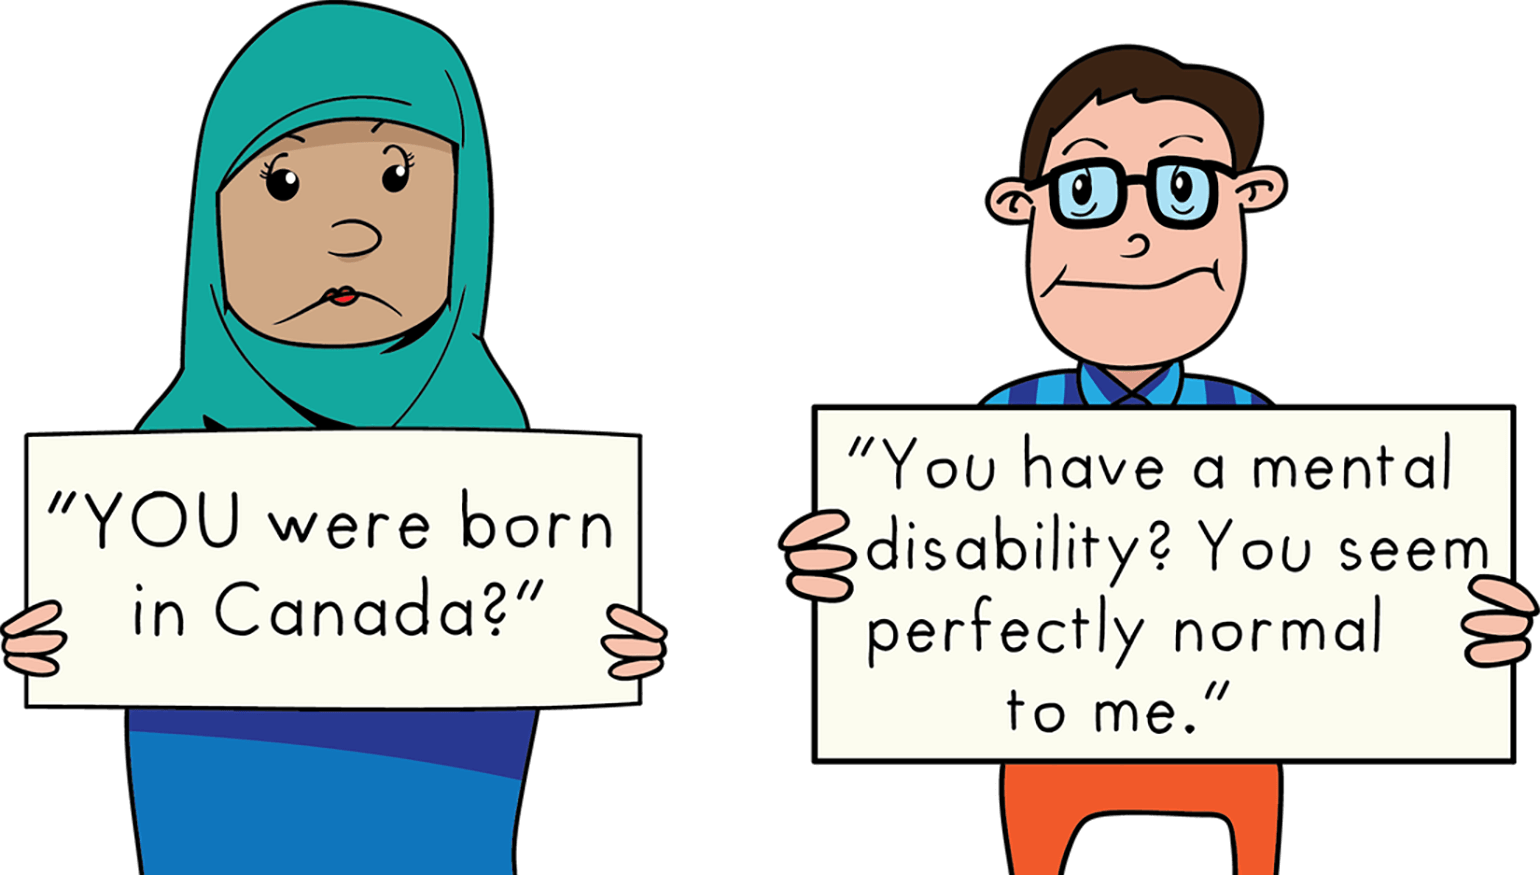 A cartoon depiction of a woman in a hijab holding a sign that says 'YOU were born in Canada?' stands next to a cartoon man with glasses holding a sign that says 'You have a mental disability? You seem perfectly normal to me.'